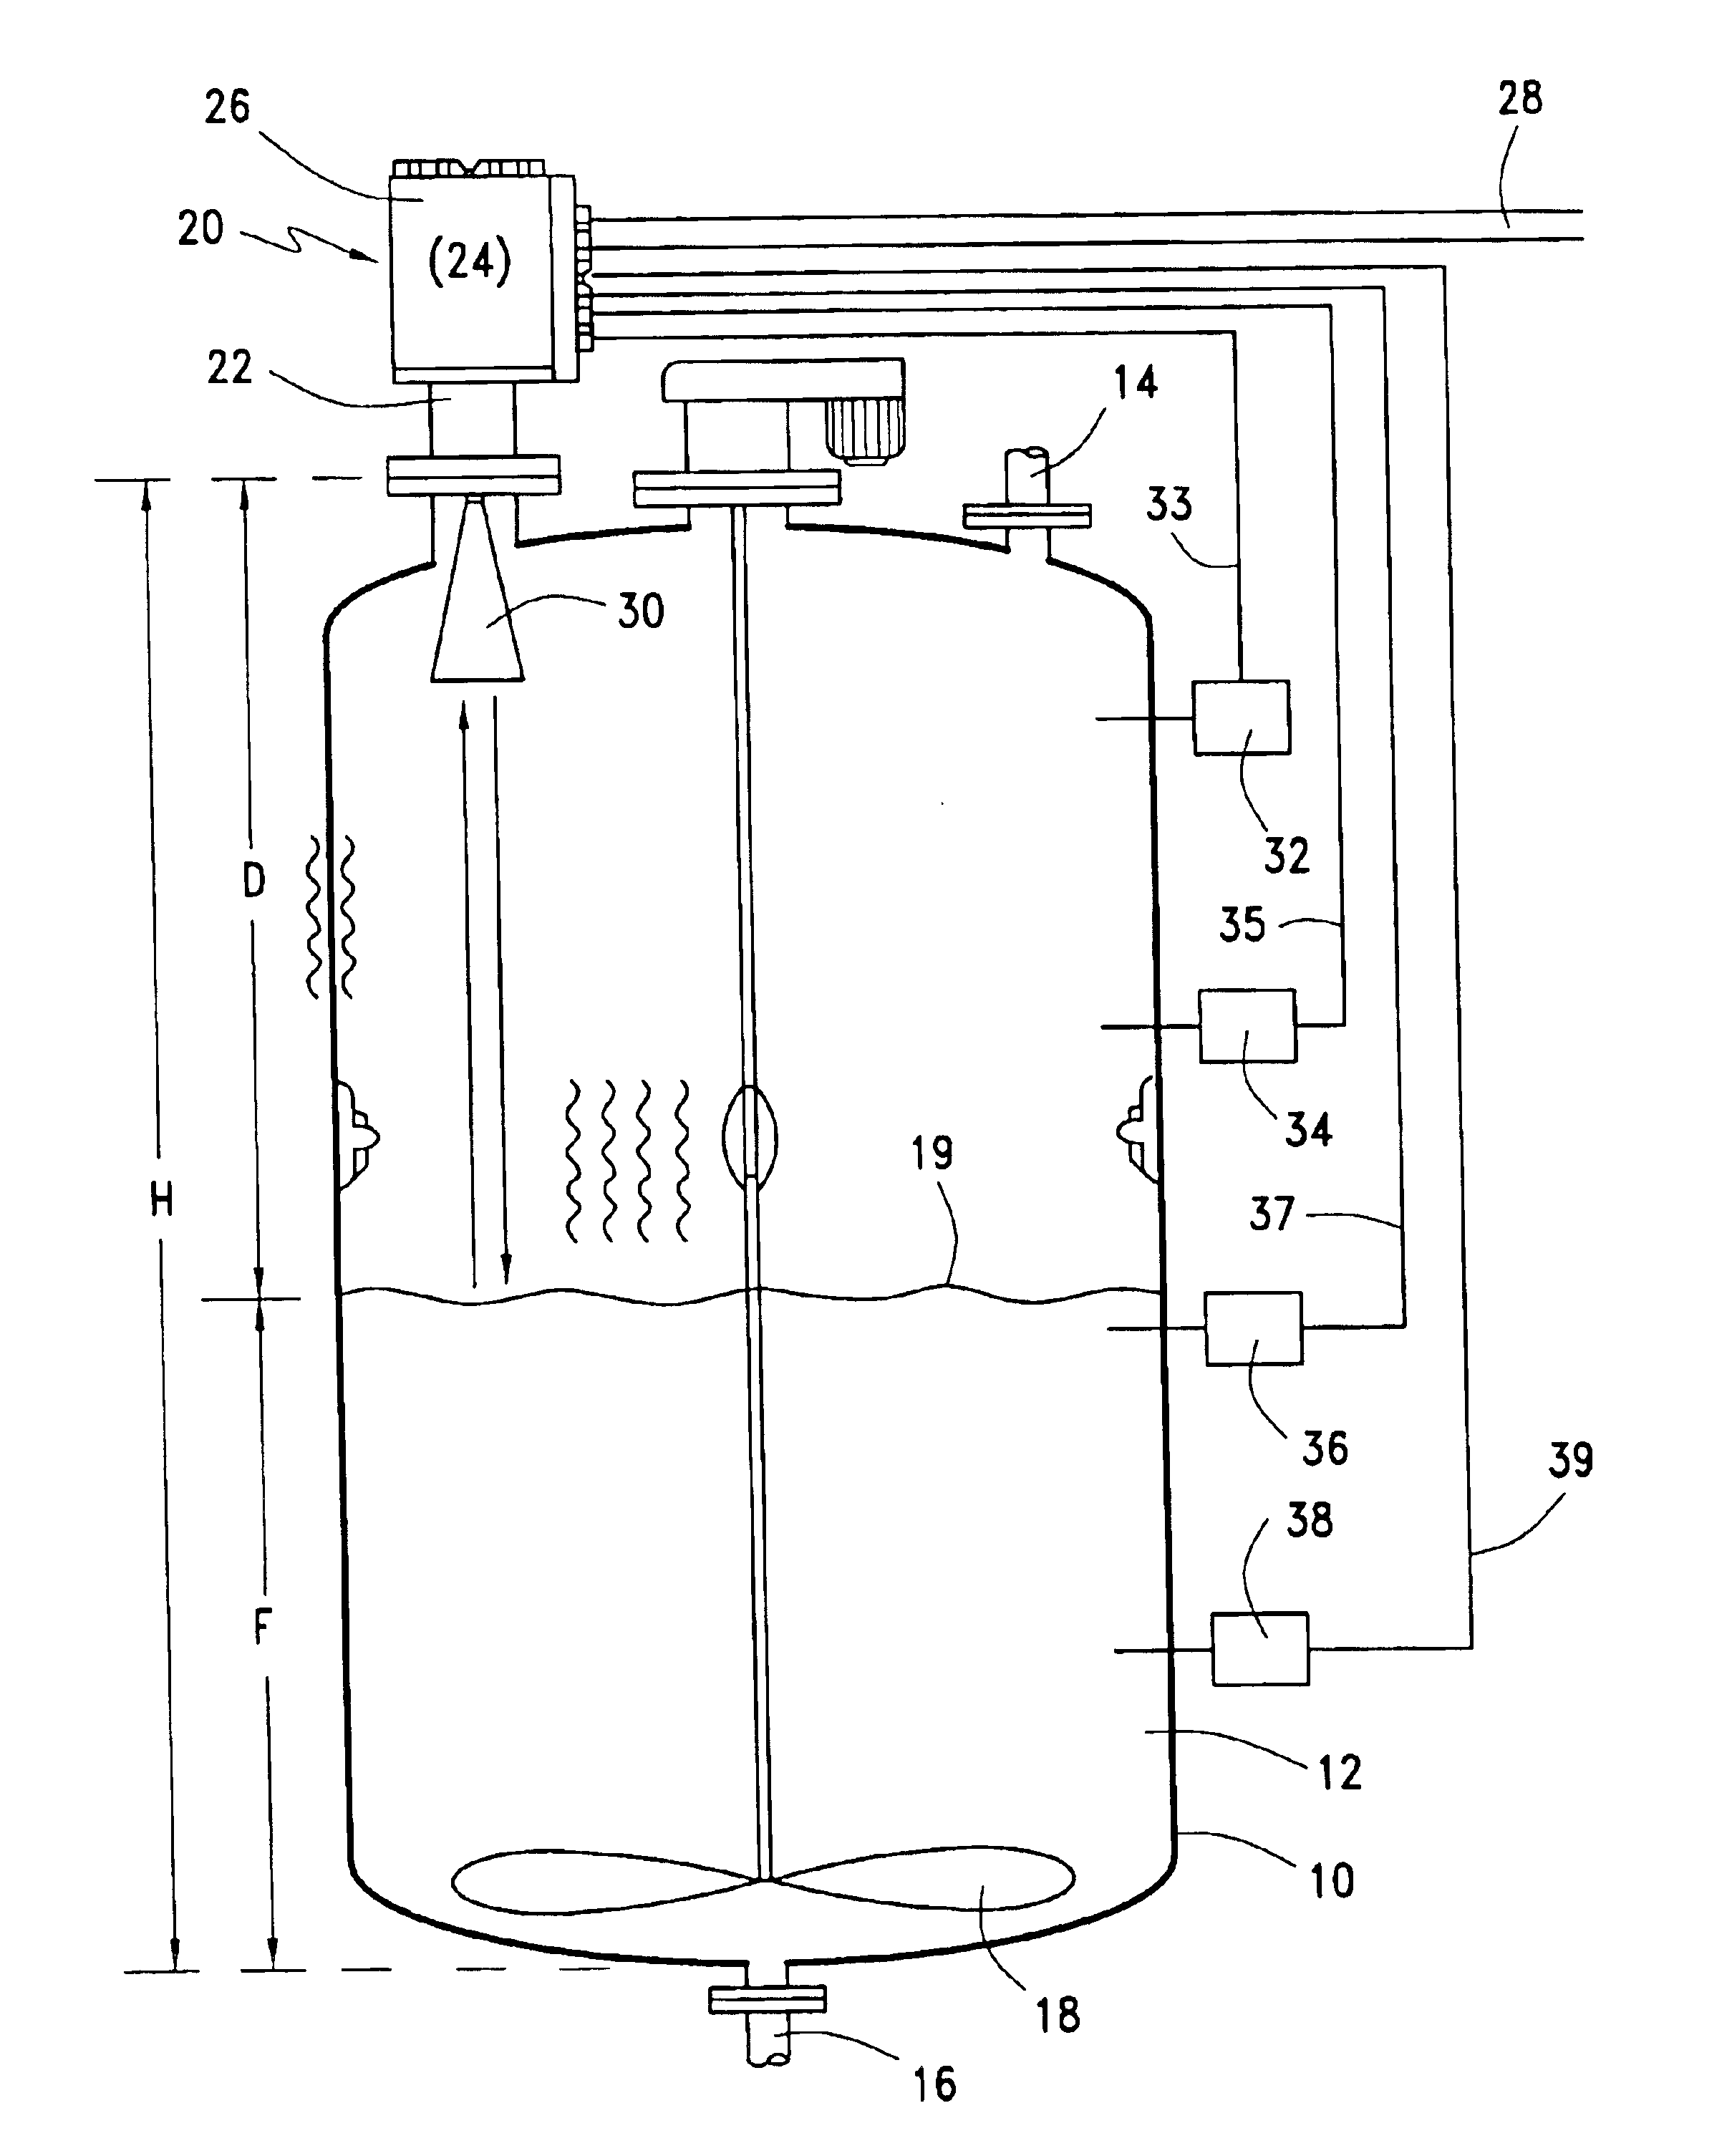 Arrangement for measuring the level of contents in a container